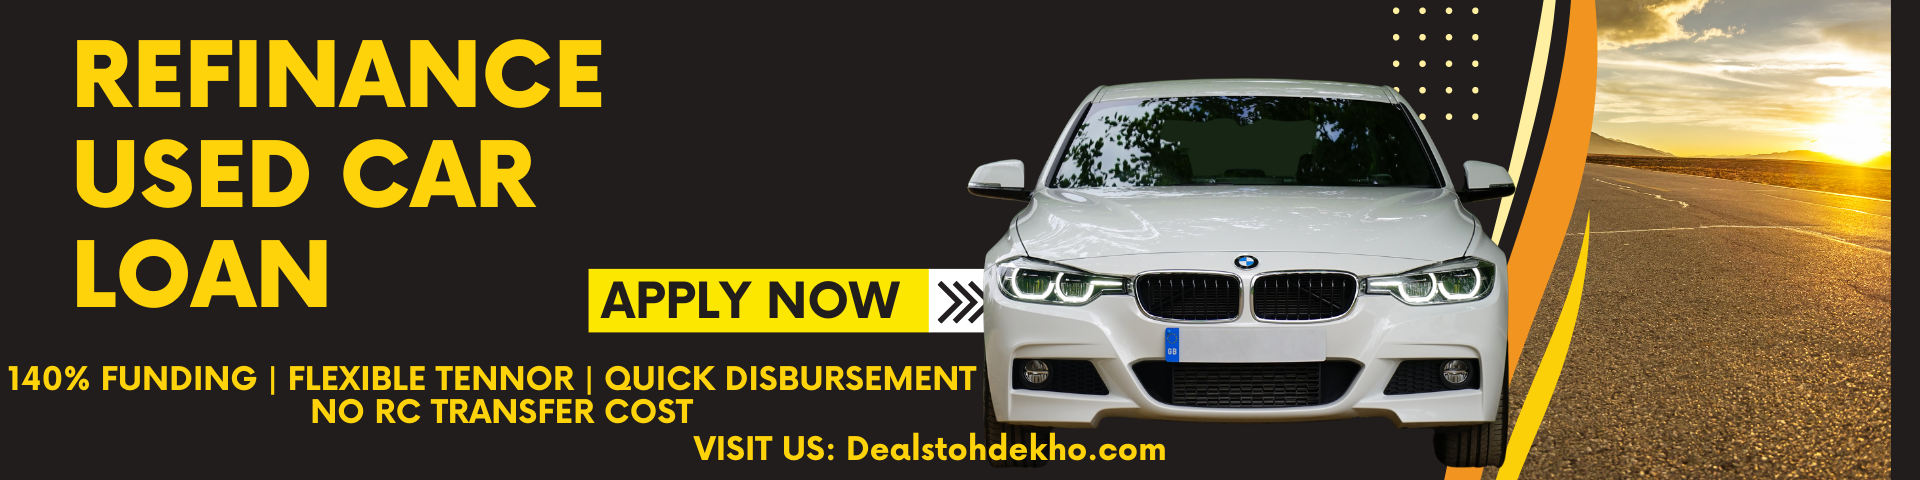 apply used car loan online and get 200% funding on insurance value